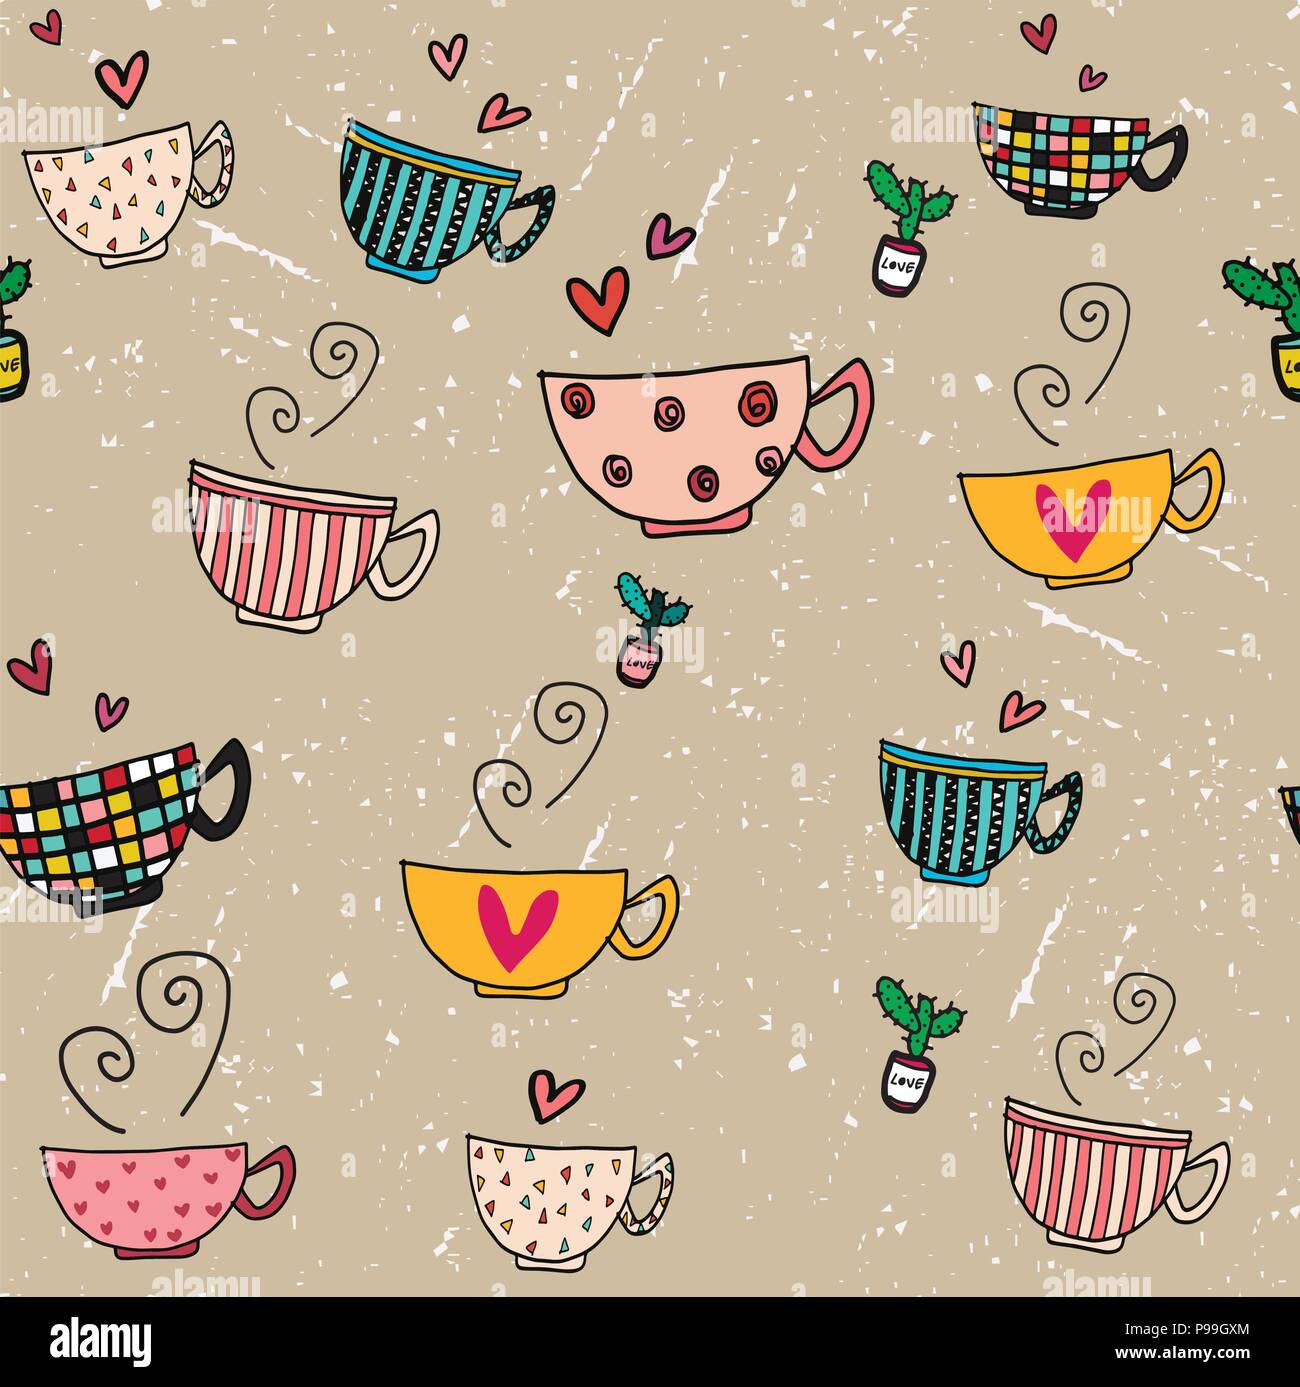 Hand drawn coffee cup seamless pattern design. Coffee cups vector pattern,  free hand drawn cups on brown background. Stock Vector